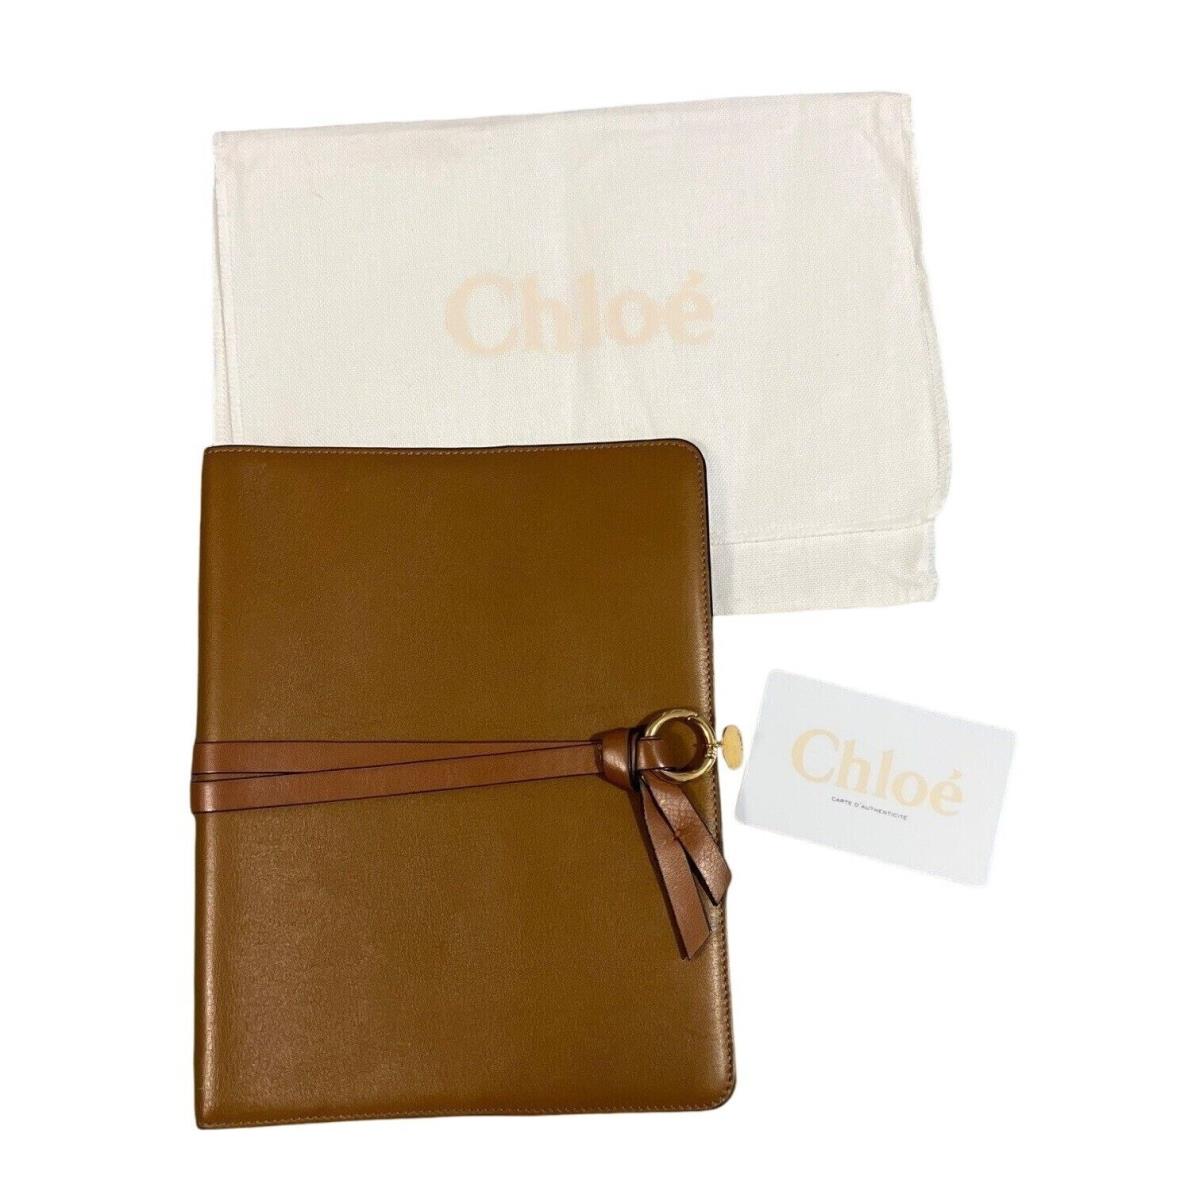 Chloe Brown Leather Notebook Organizer with Dust Bag